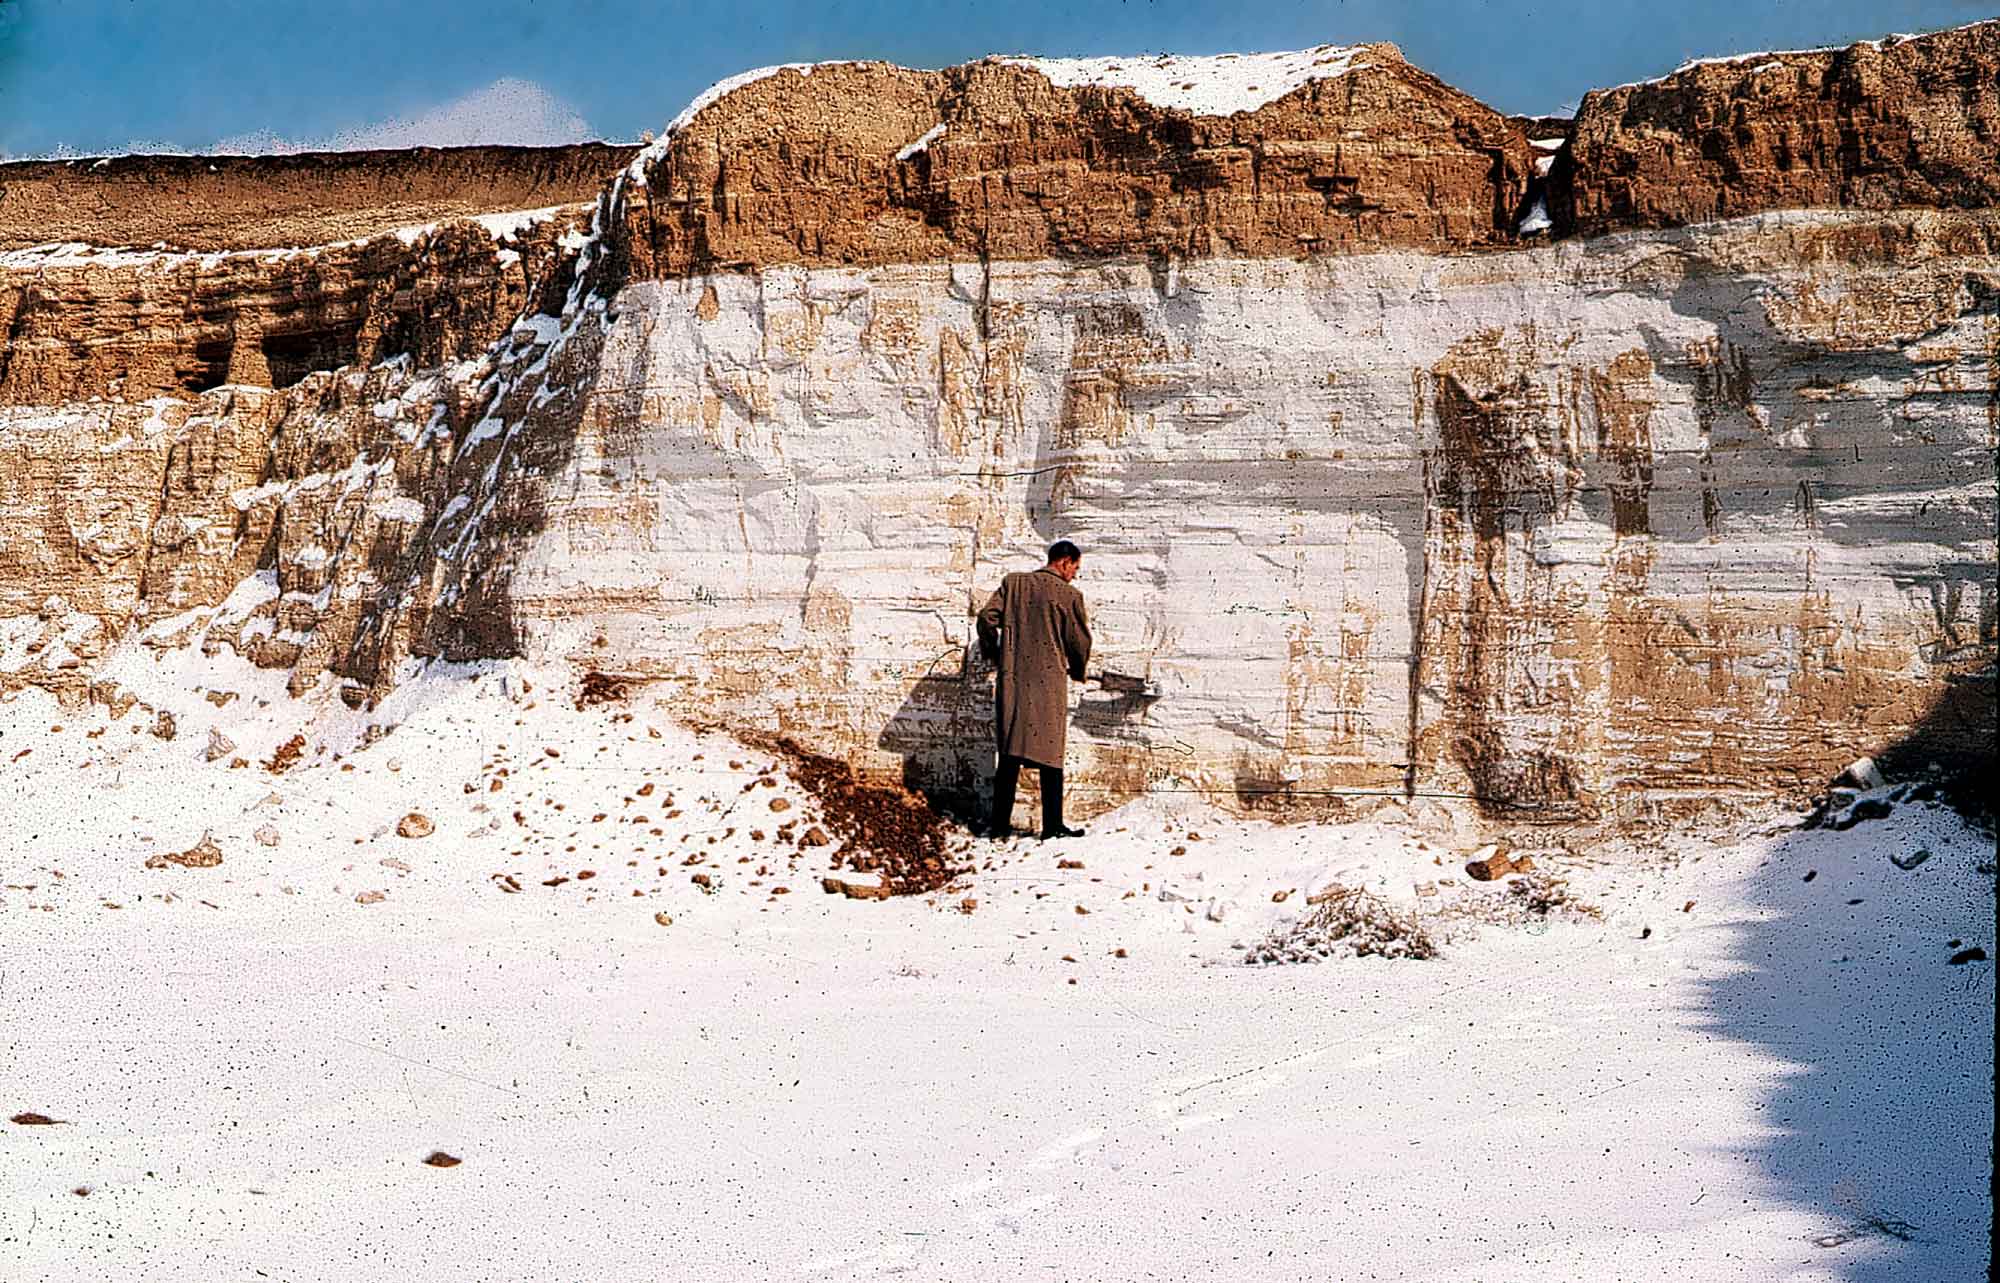 Photograph of a man shoveling ash from a Pearlette Ash deposit in Kansas.